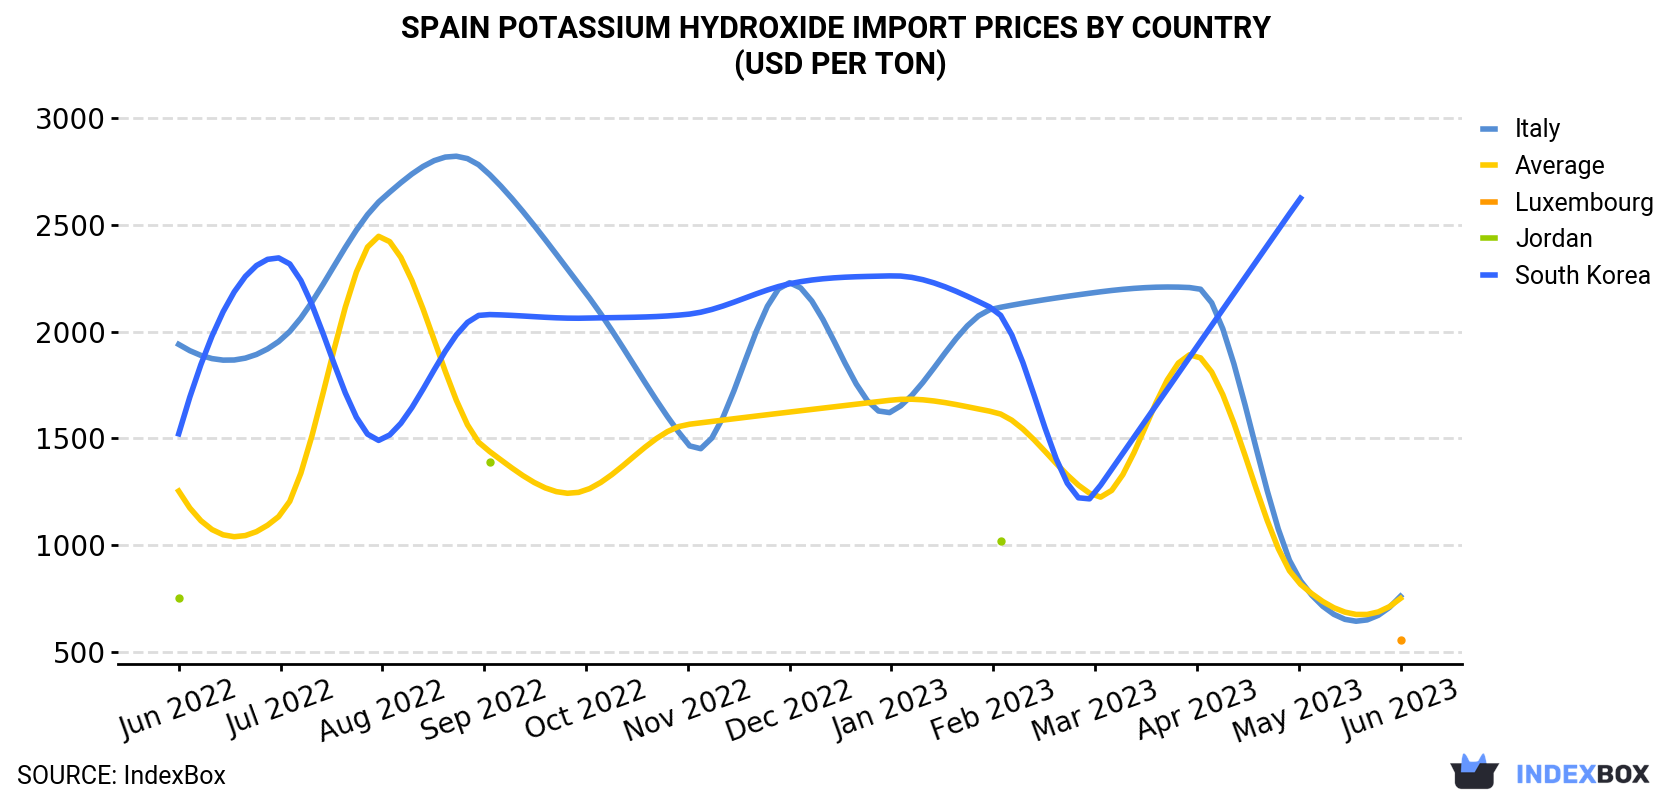 Spain Potassium Hydroxide Import Prices By Country (USD Per Ton)